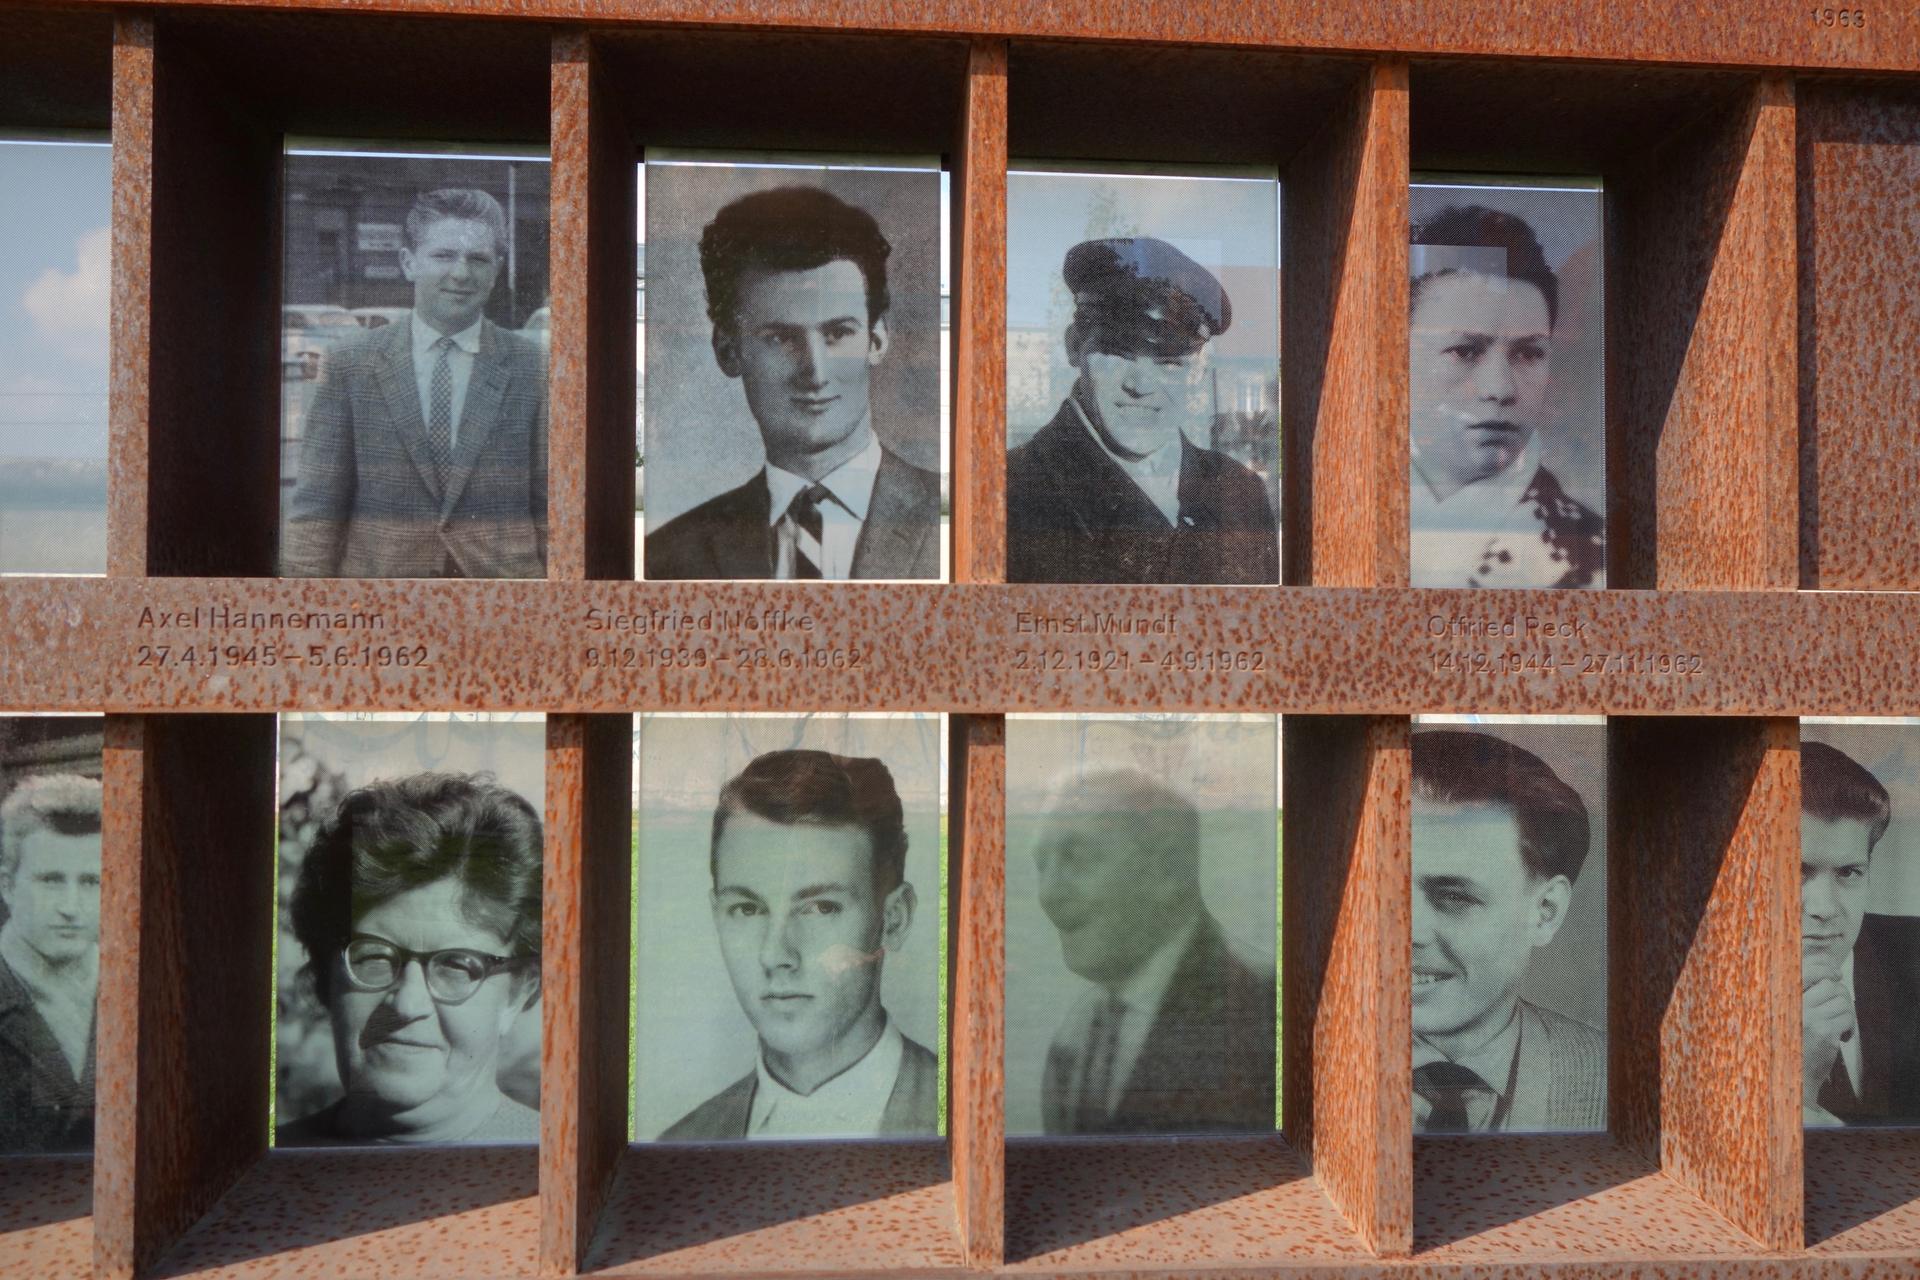 Photos of dozens of people killed trying to get past the Berlin Wall and escape East Germany during the Cold War